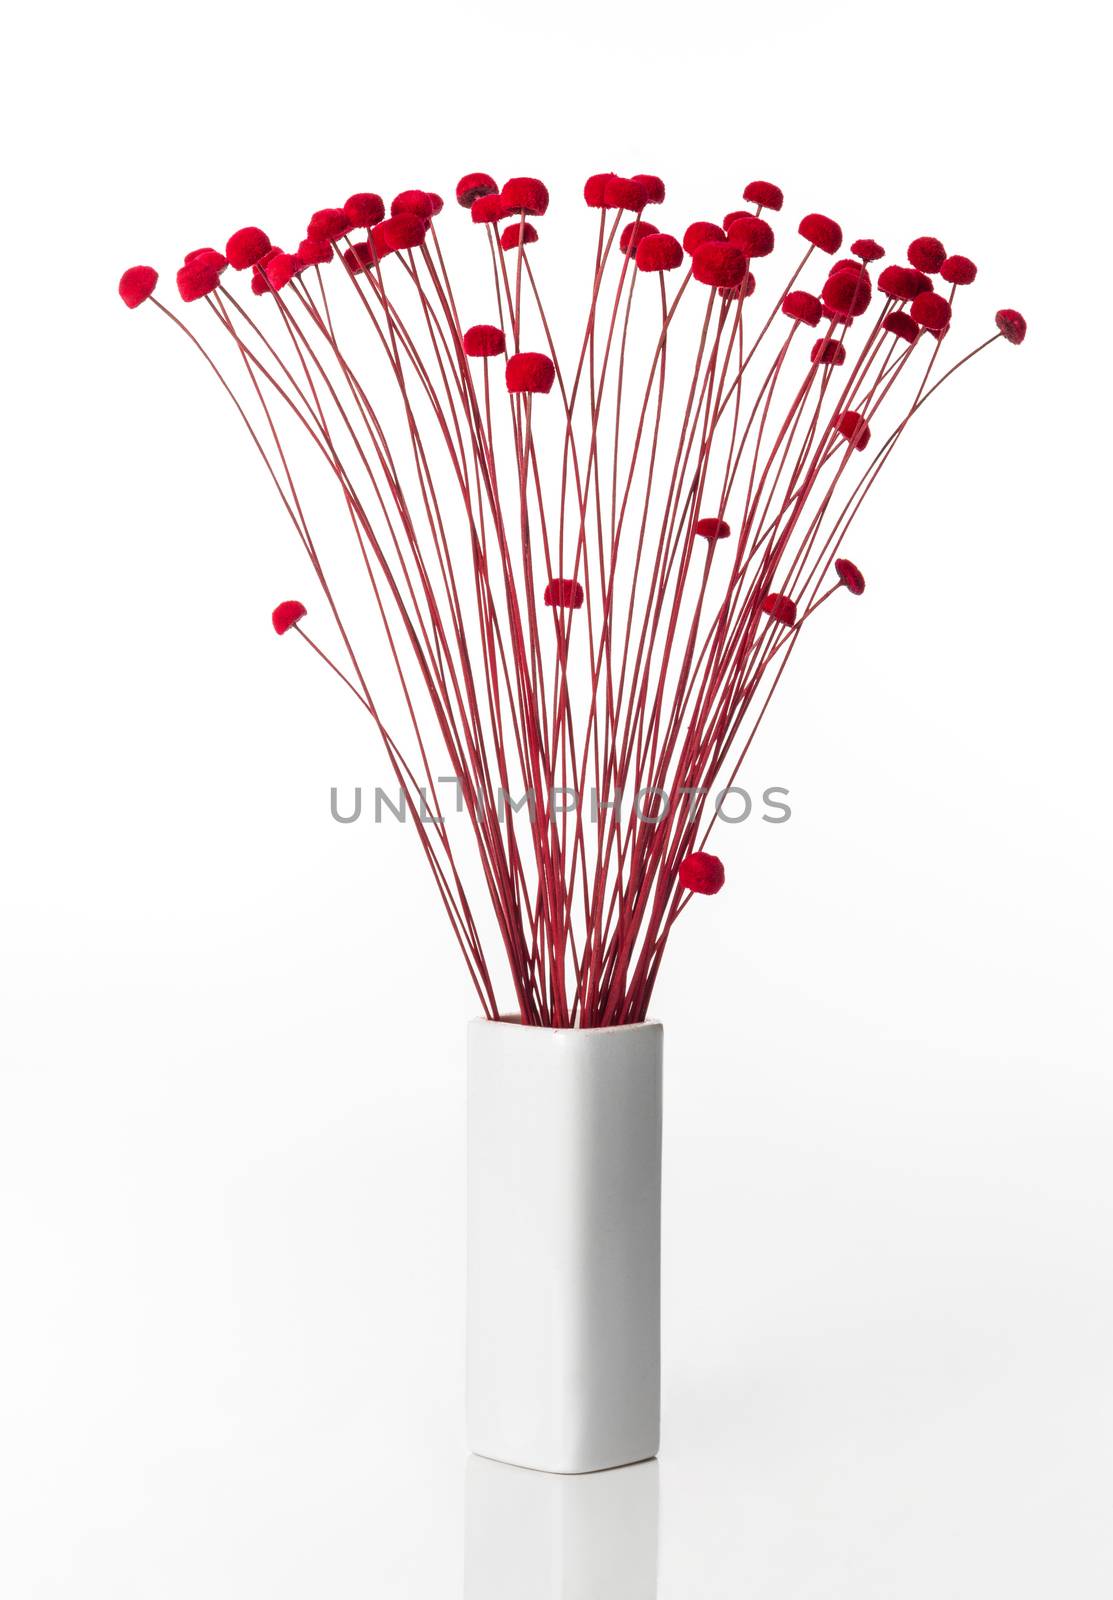 Bouquet of simple and beautiful red flowers in a white vase. Isolated on white background.